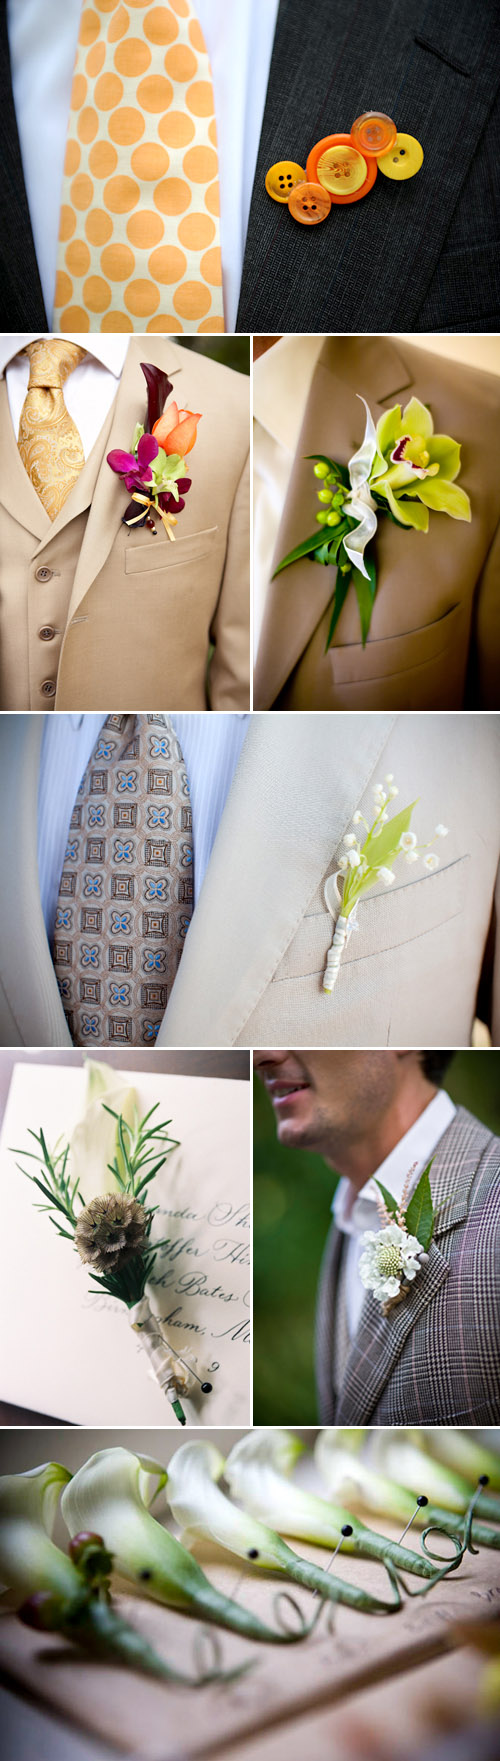 creative and colorful groom's wedding boutonnieres